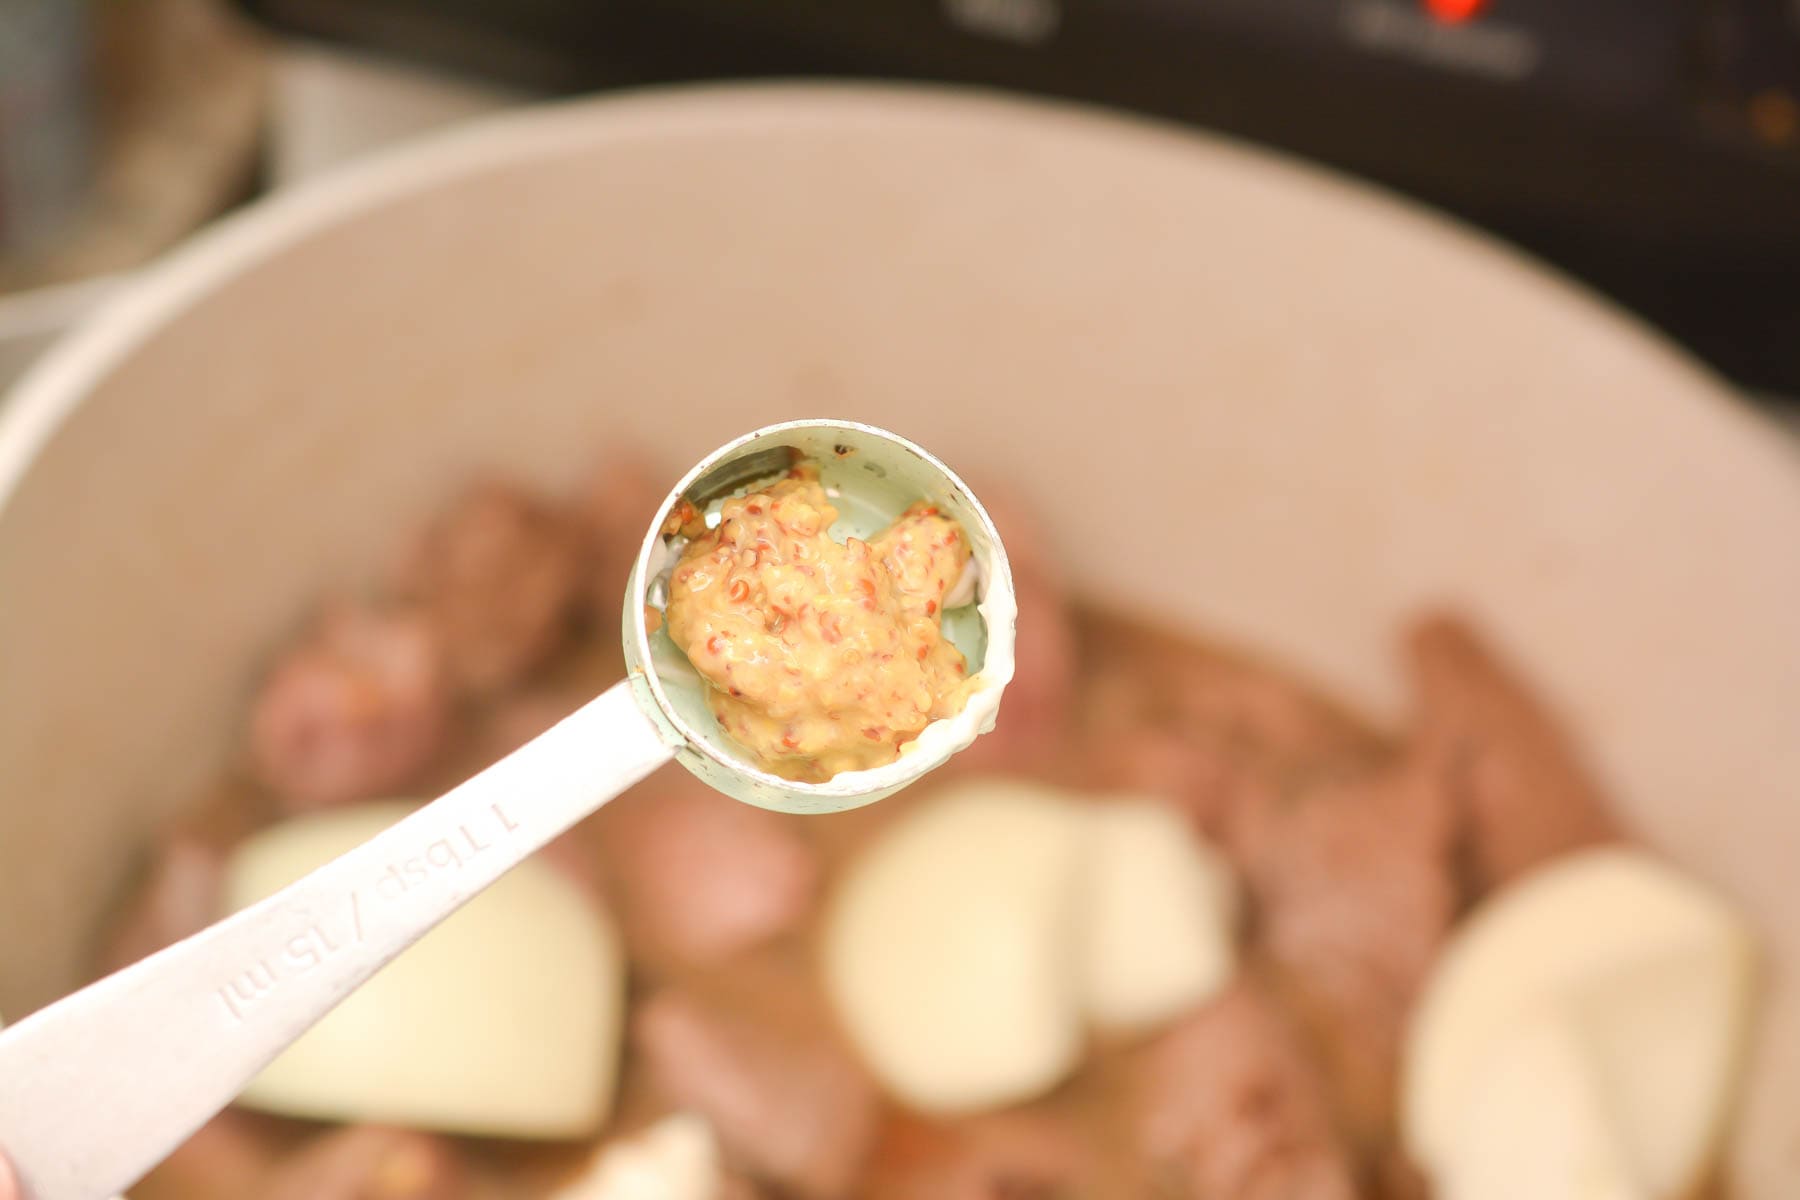 add ½ tbsp dijon mustard and 1 packet of french onion soup mix.